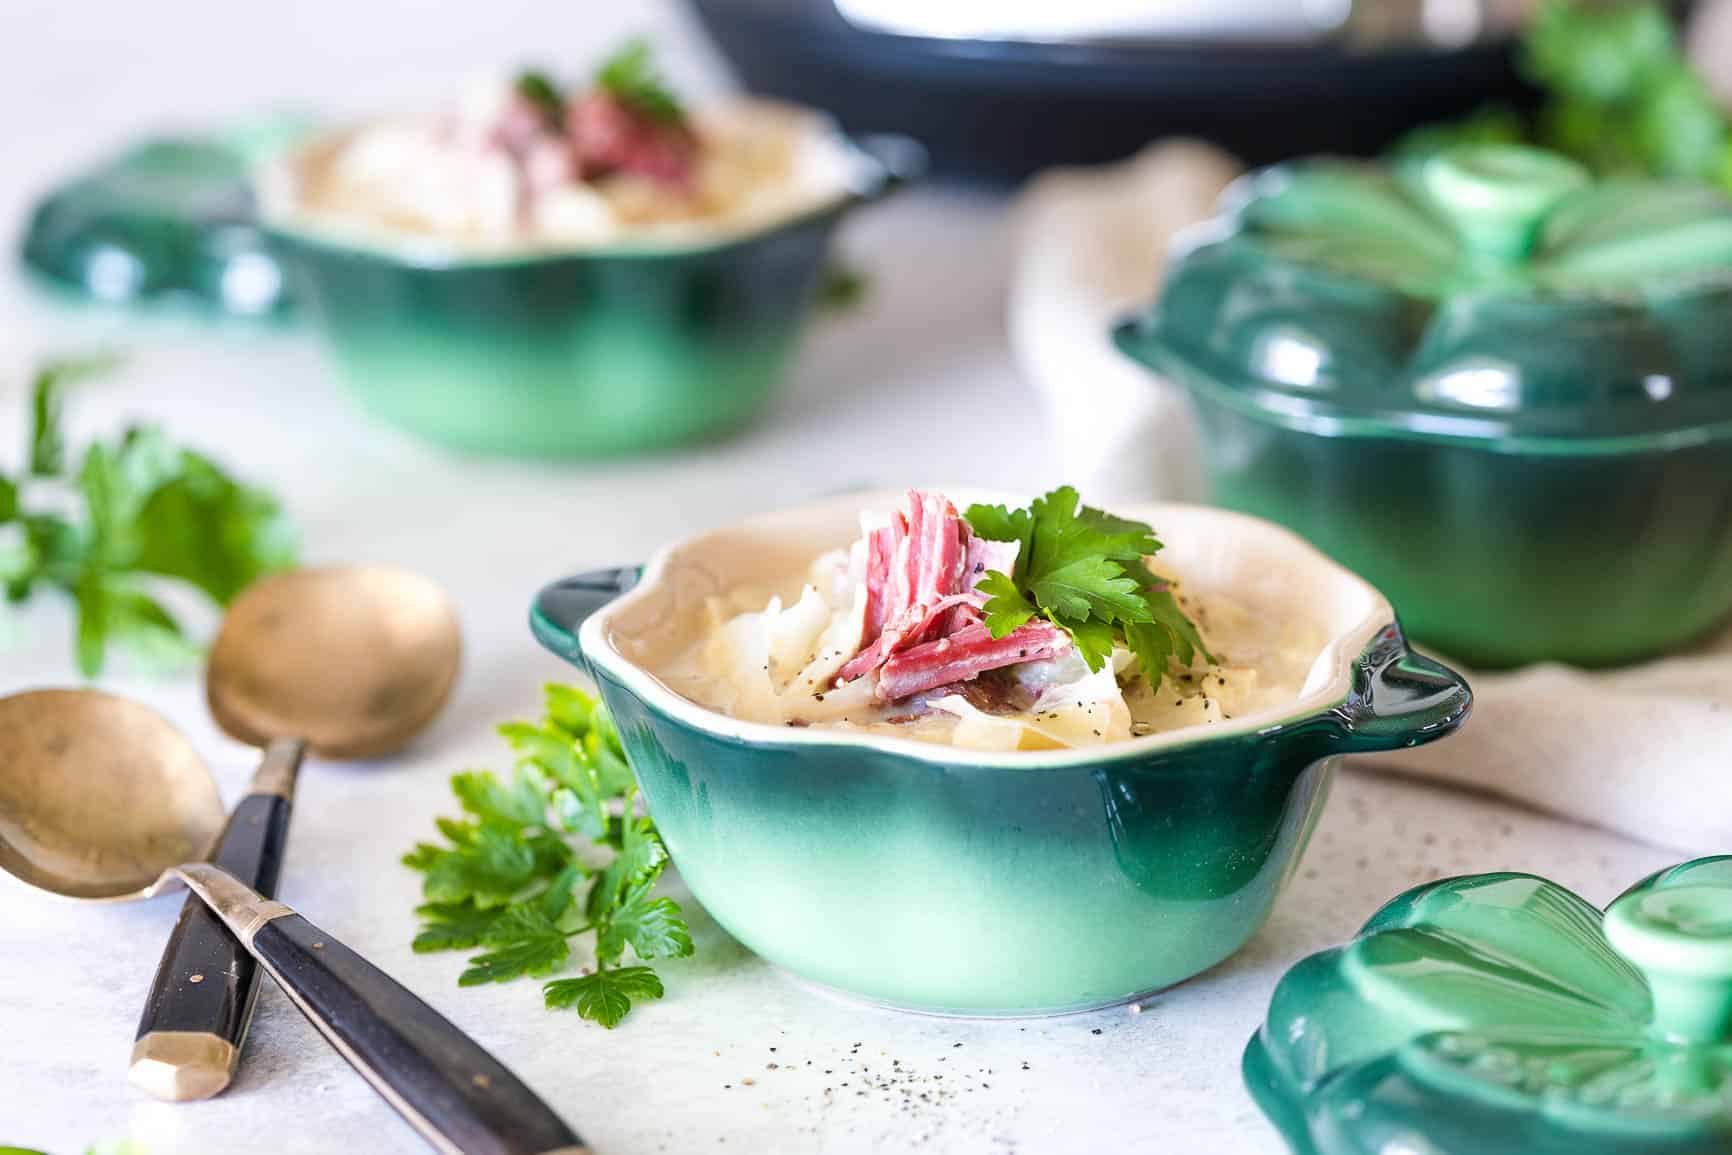 My Keto Creamy Corned Beef Soup is chock full of corned beef and cabbage flavor, swimming in a bowl of creamy deliciousness. Made quickly in your Instant Pot or pressure cooker, that's low-carb, gluten-free & grain-free!